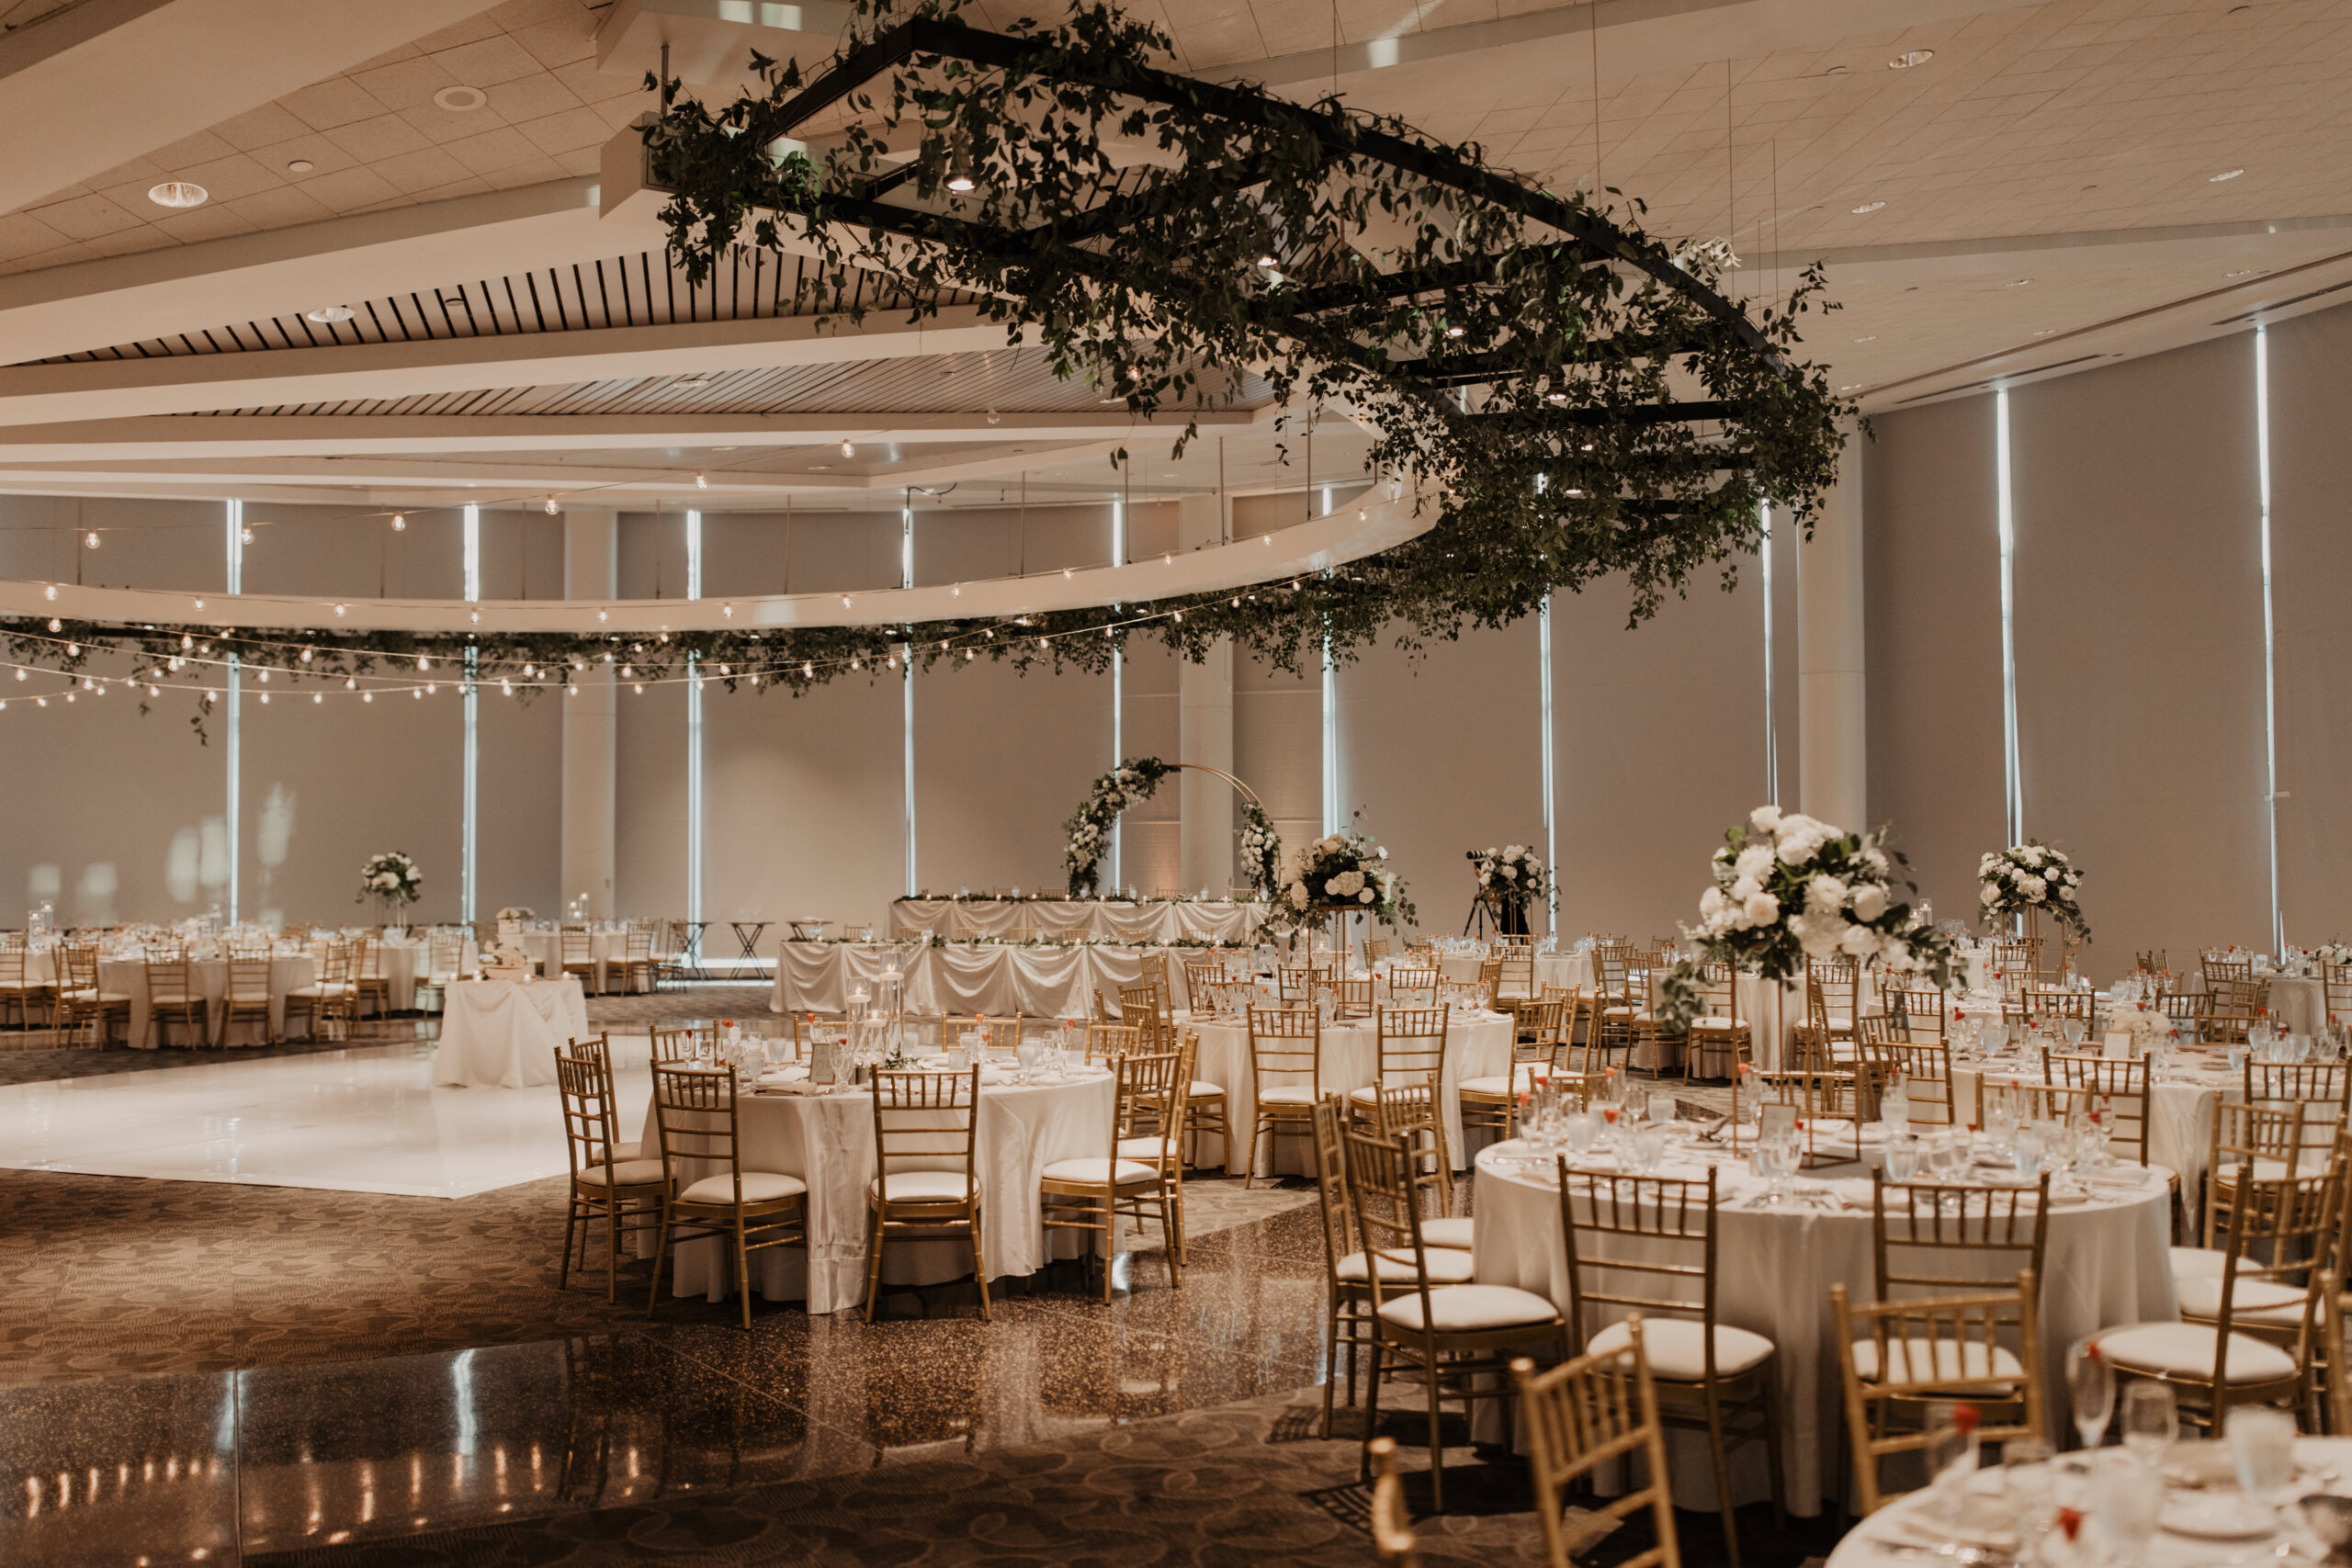 Elegant_Event_Lighting_Chicago_Wedding_Esplanade_Lakes_By_Double_Tree_Downers_Grove_White_Vinyl_Dance_Floor_Cafe_Lights_Greenery_Black_Ring_Dancing_Guest_Tables_reception-scaled.jpg